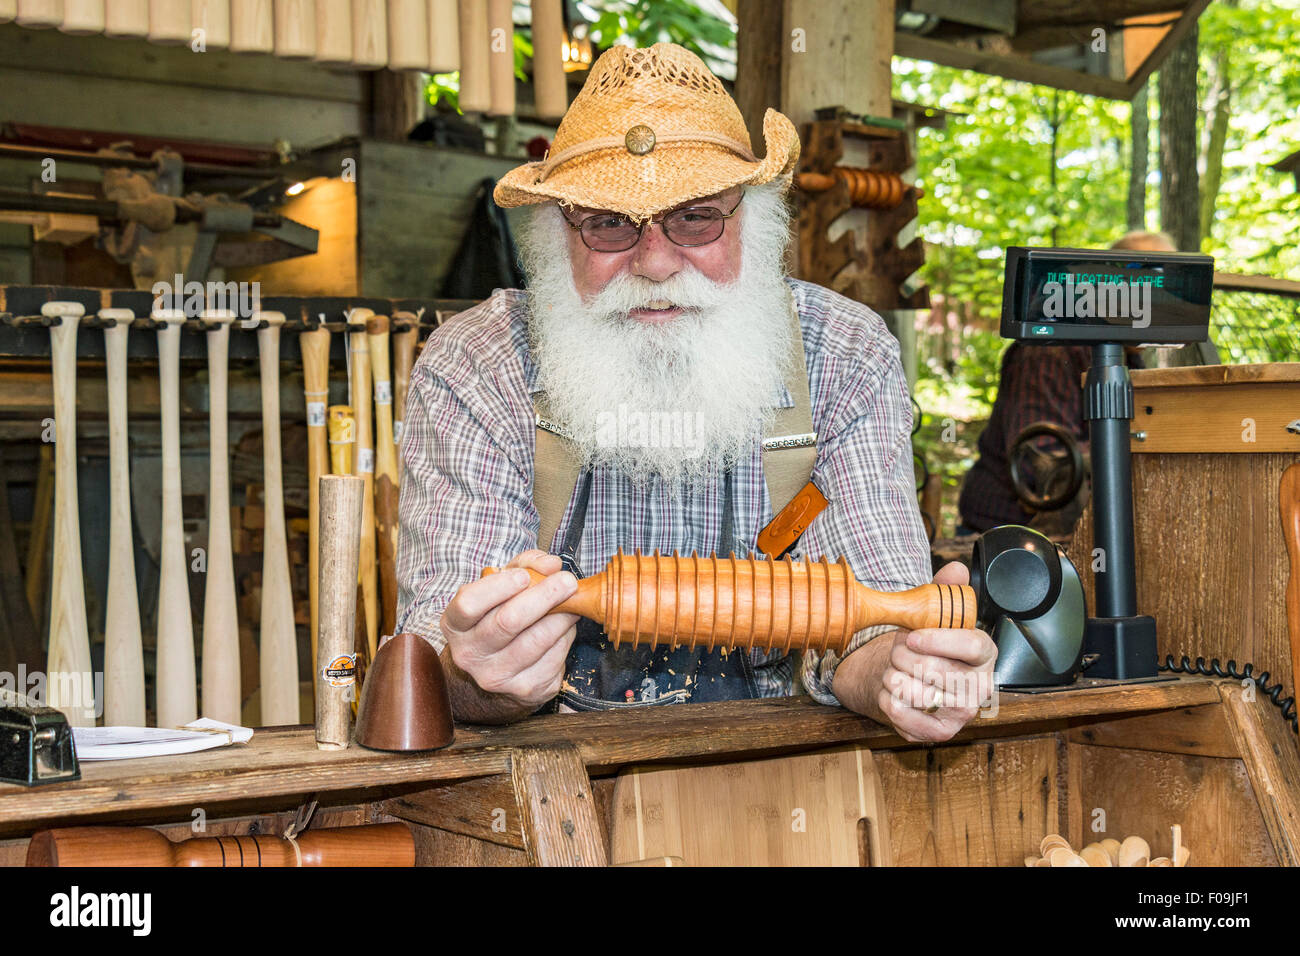 One of several wood carvers at Silver Dollar City, an 1880s theme amusement park near Branson, MO. Stock Photo